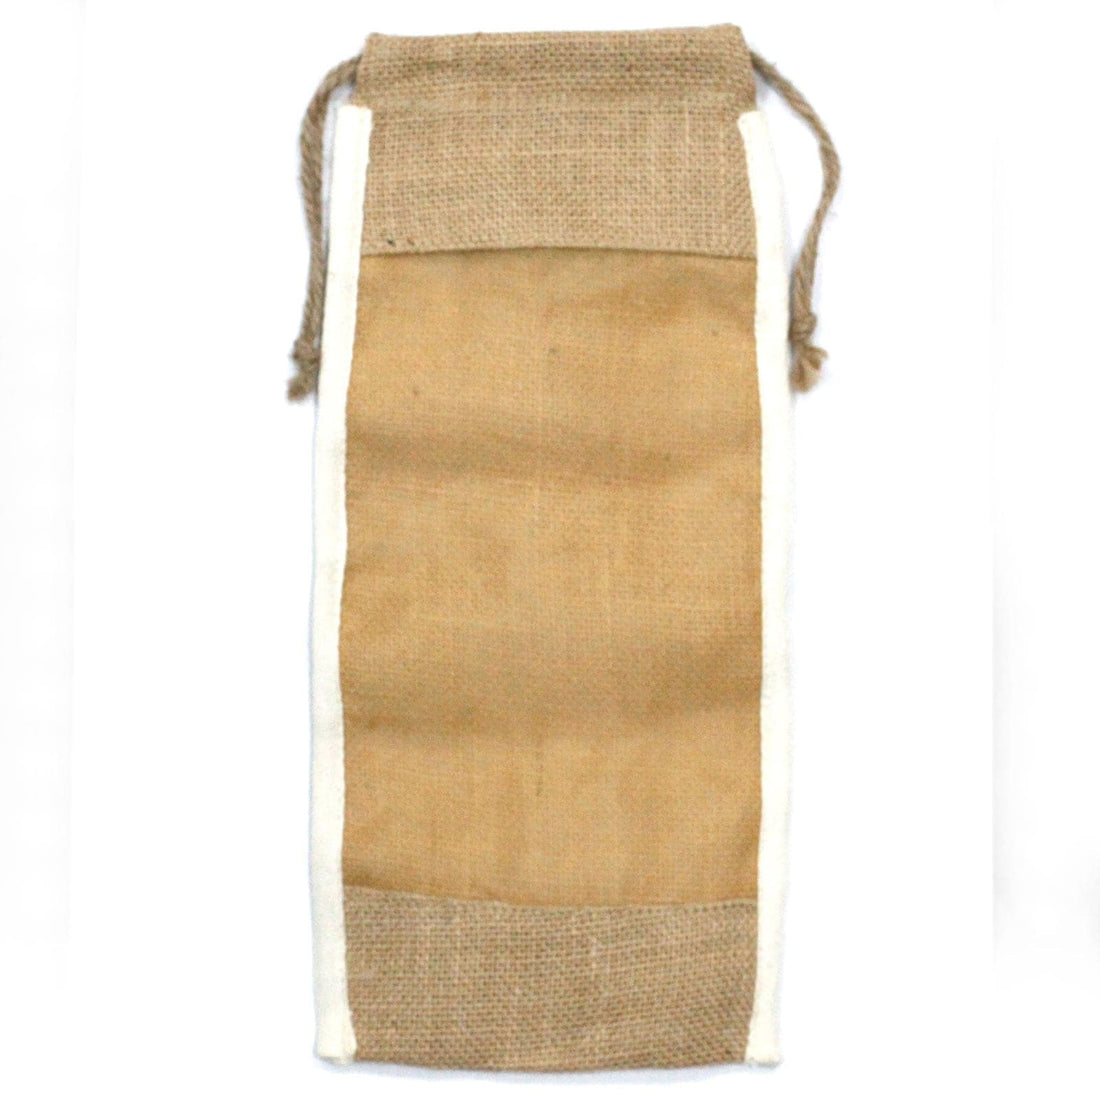 Long Washed Jute Pouch - 35x15cm - best price from Maltashopper.com NATWP-08